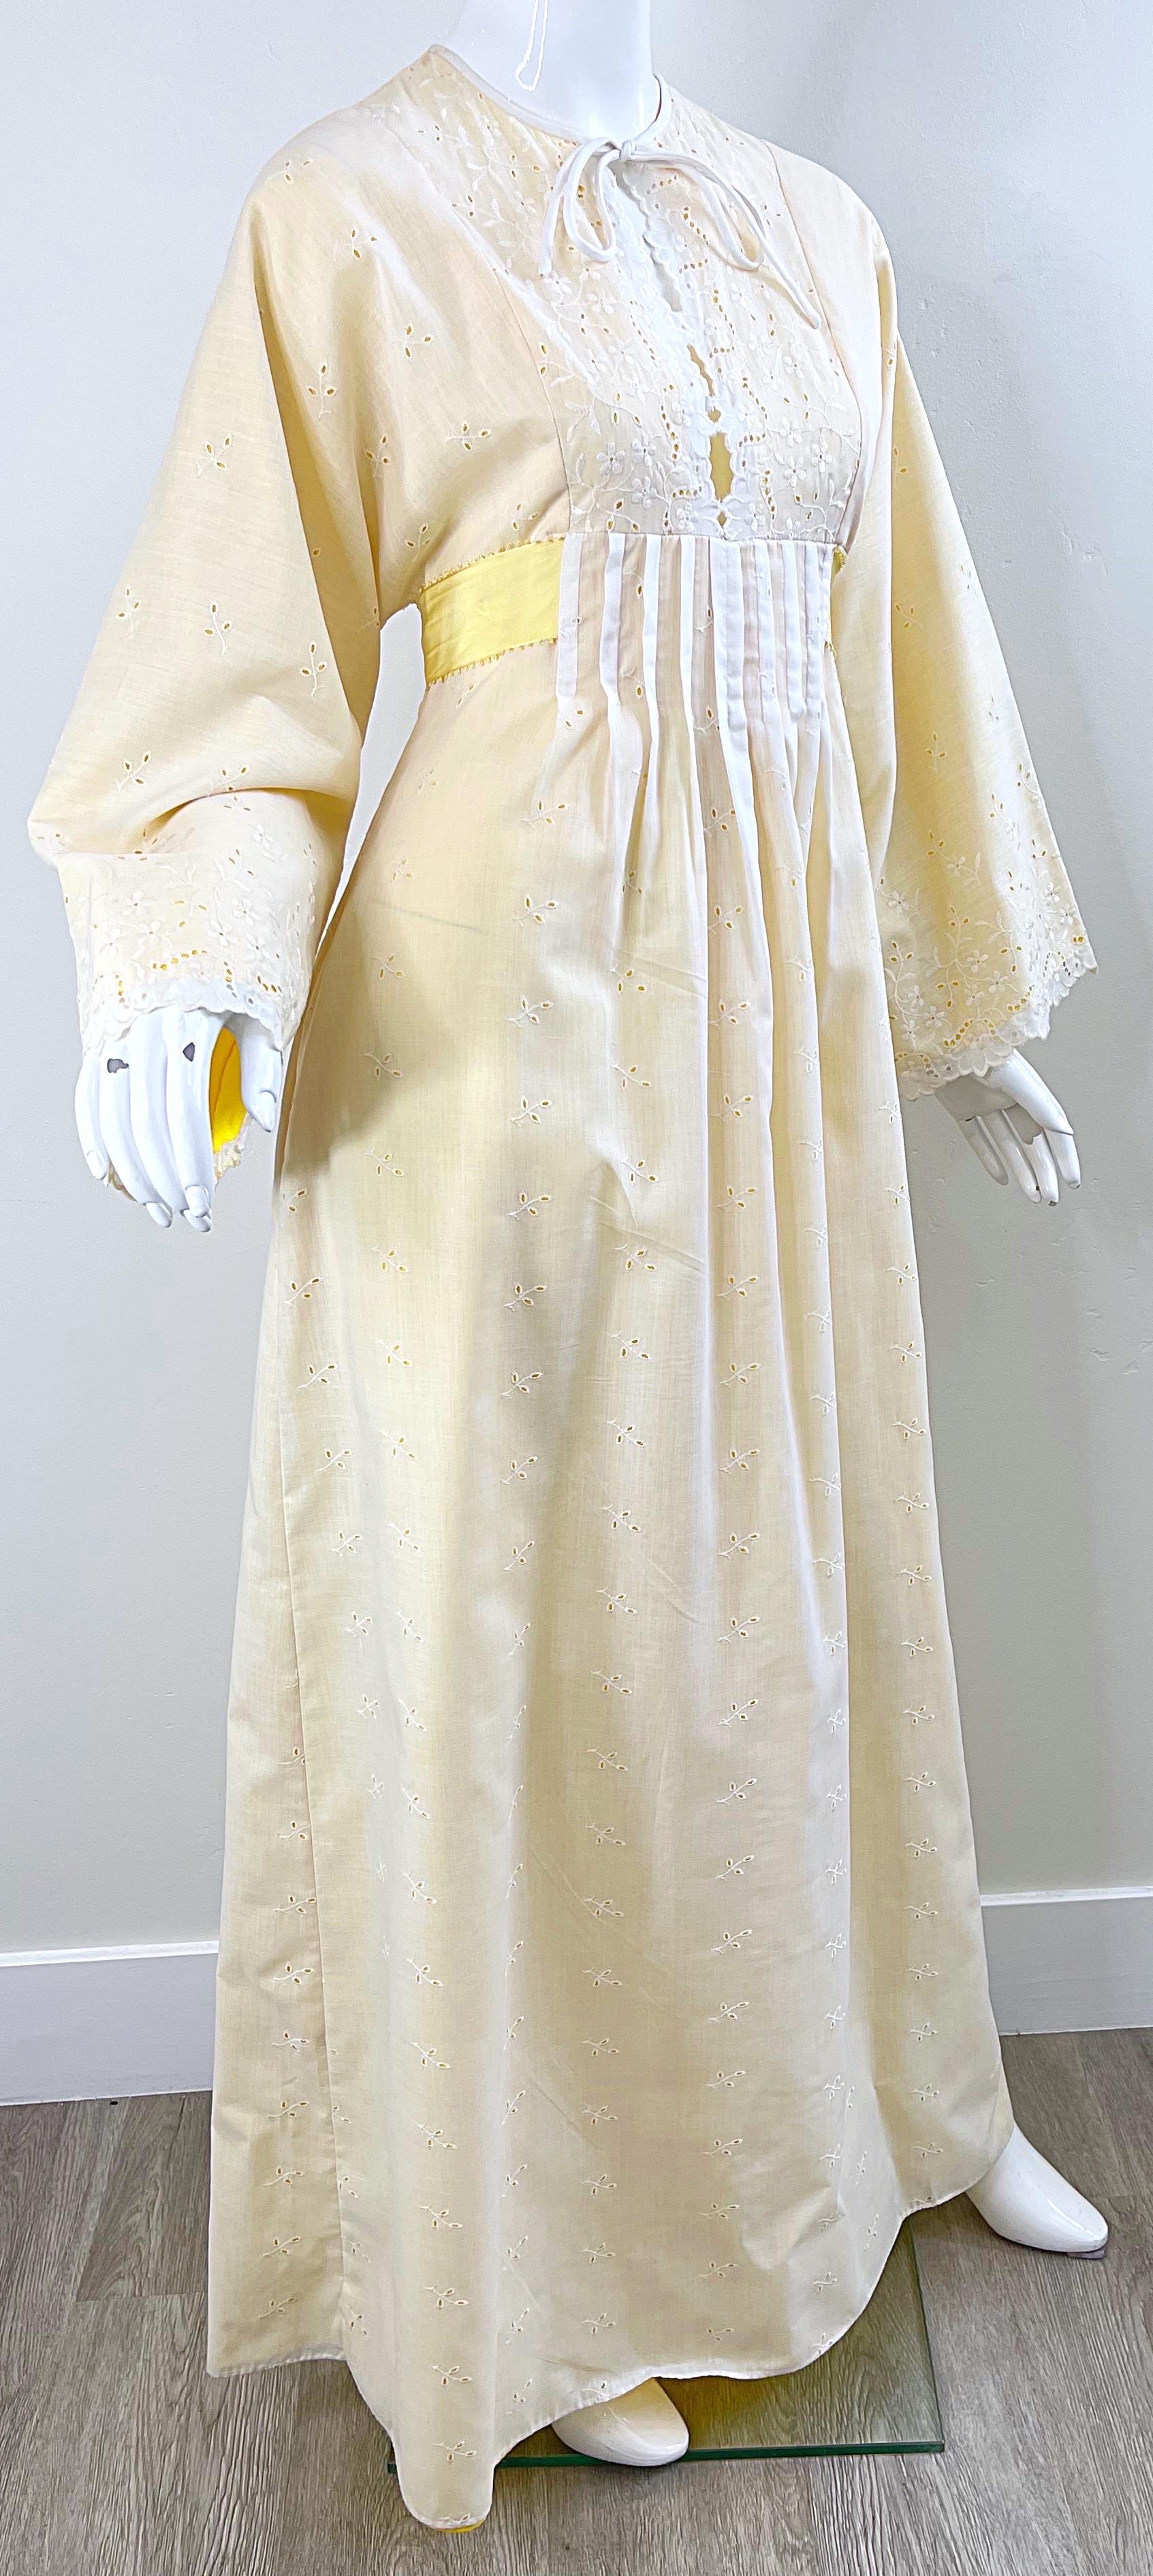 1970s Bill Tice Pale Yellow + White Cotton Eyelet Vintage 70s Maxi Dress For Sale 4